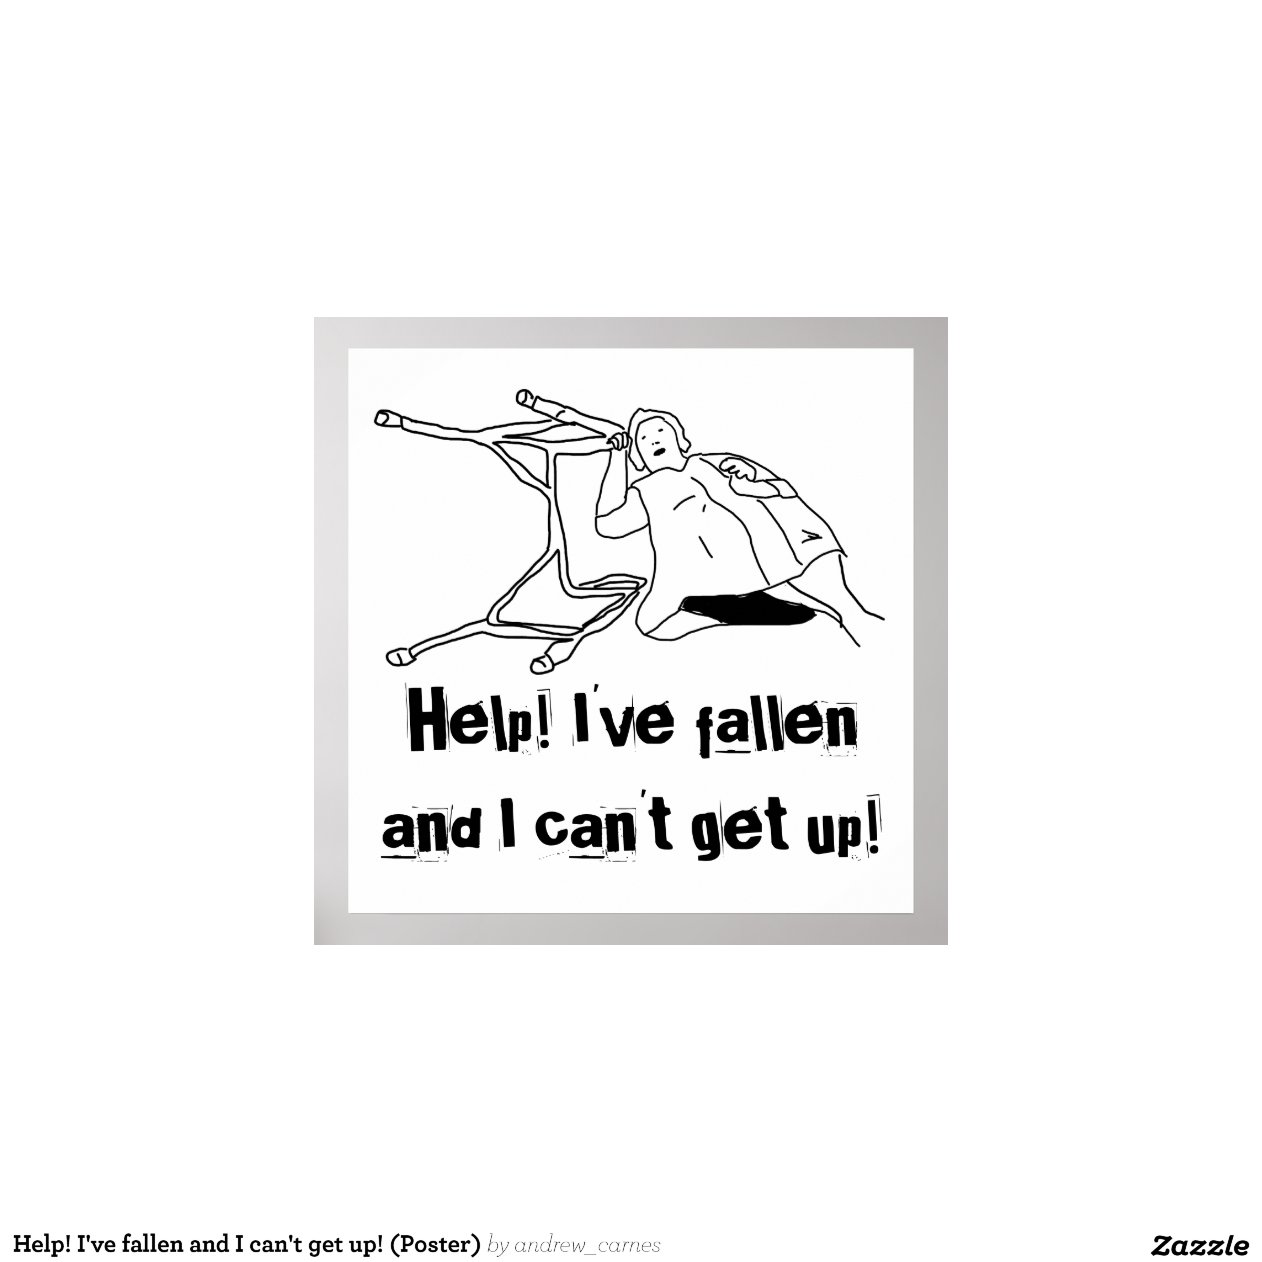 Help! I've fallen and I can't get up! (Poster) | Zazzle